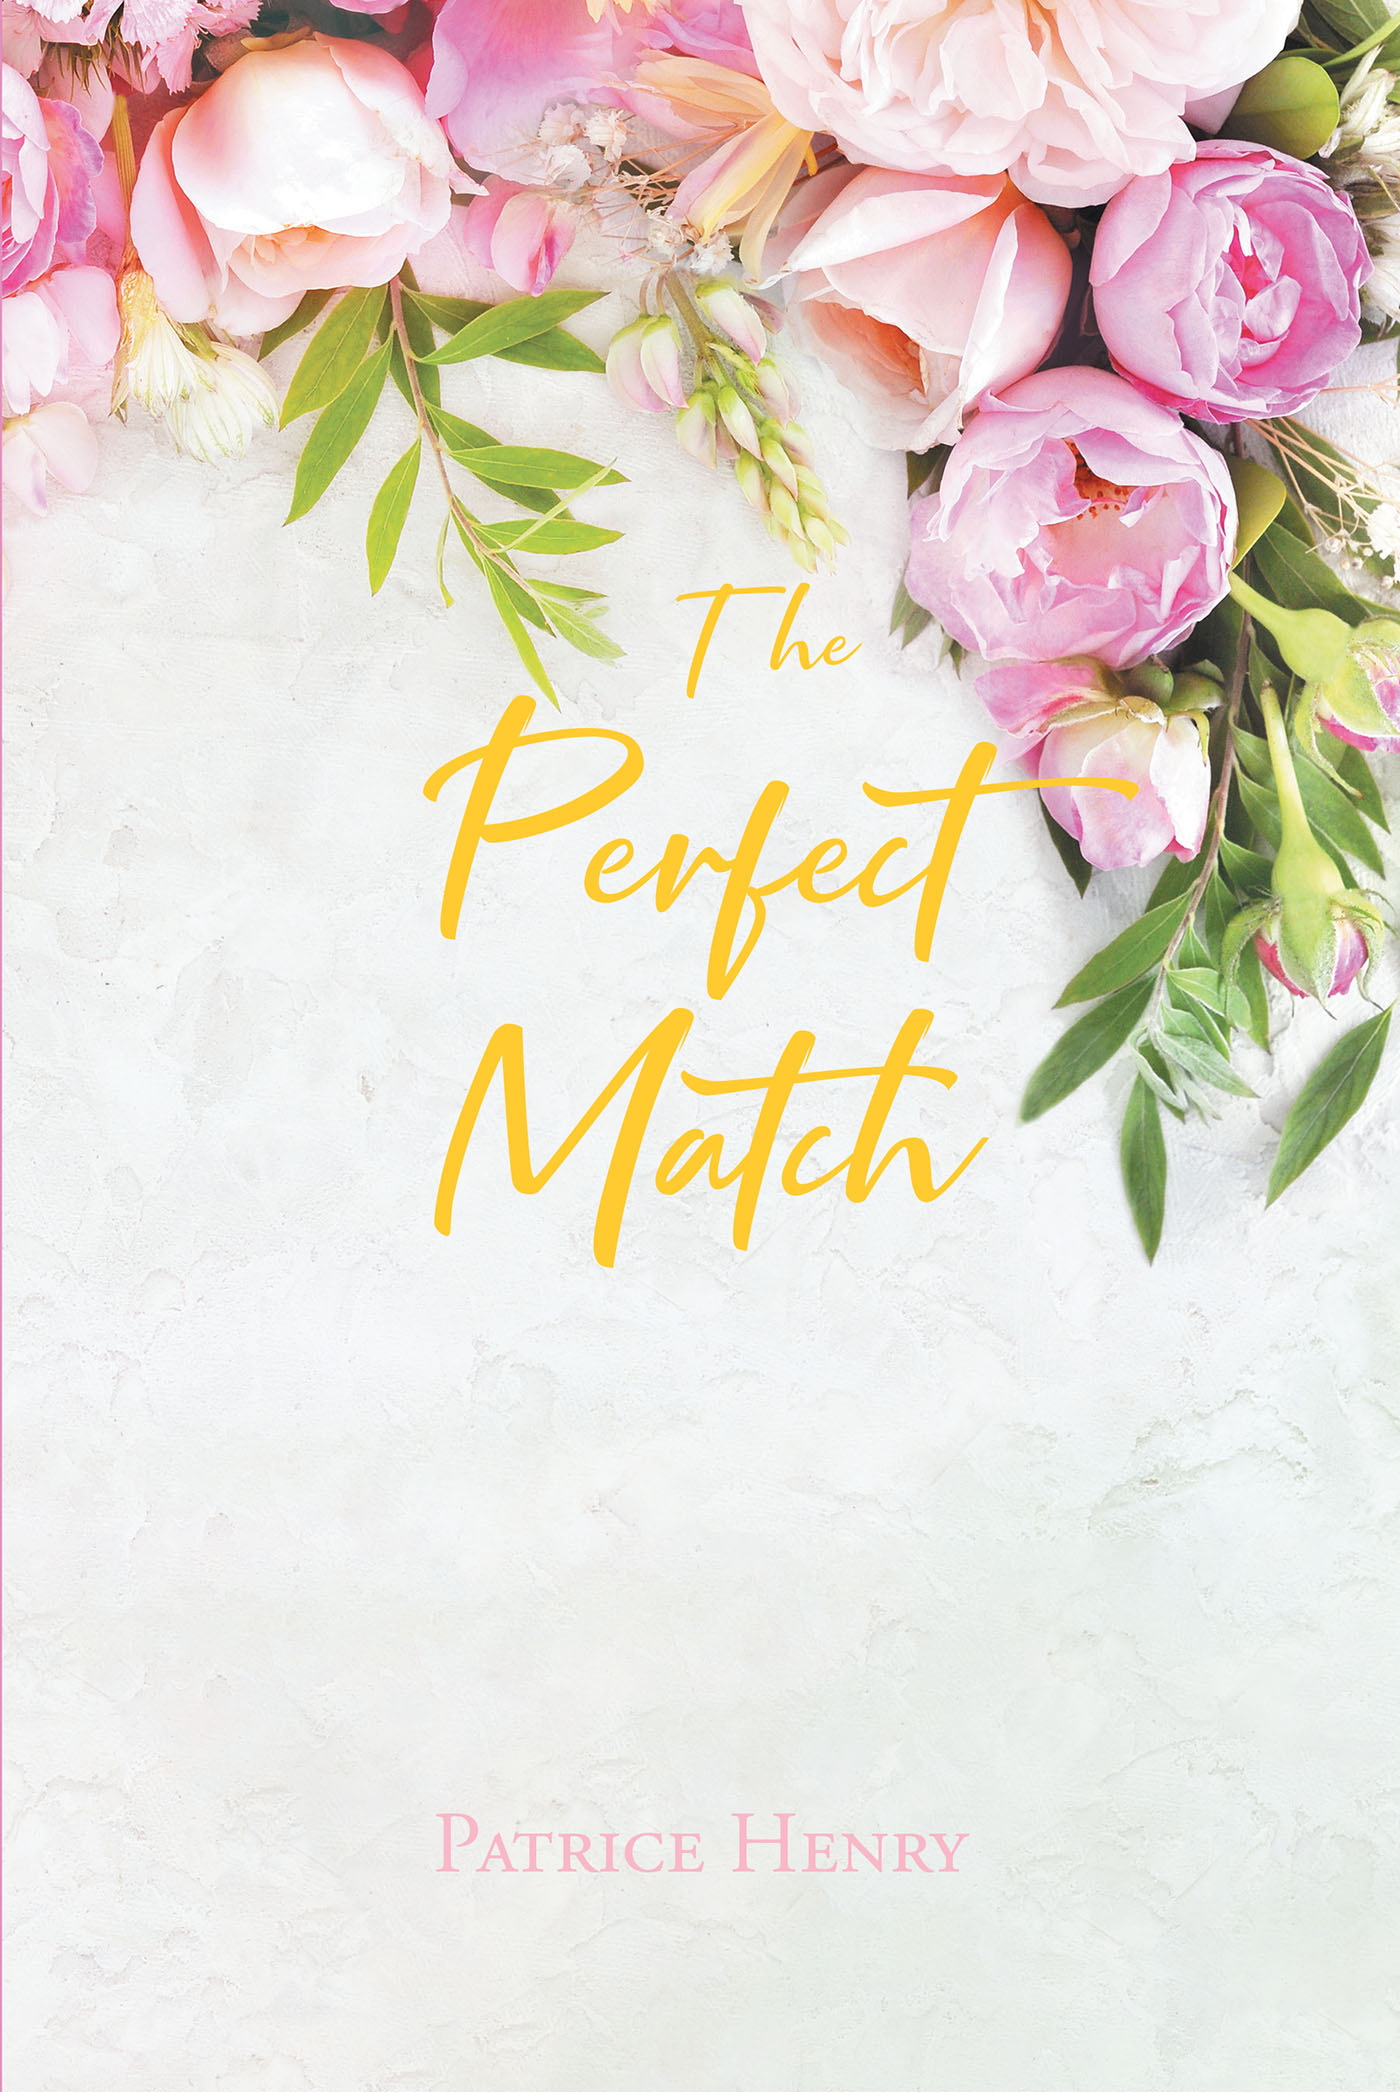 Patrice Henry’s Newly Released "The Perfect Match" is an Encouraging Discussion of the Variables That Go Into a Positive, Productive Relationship